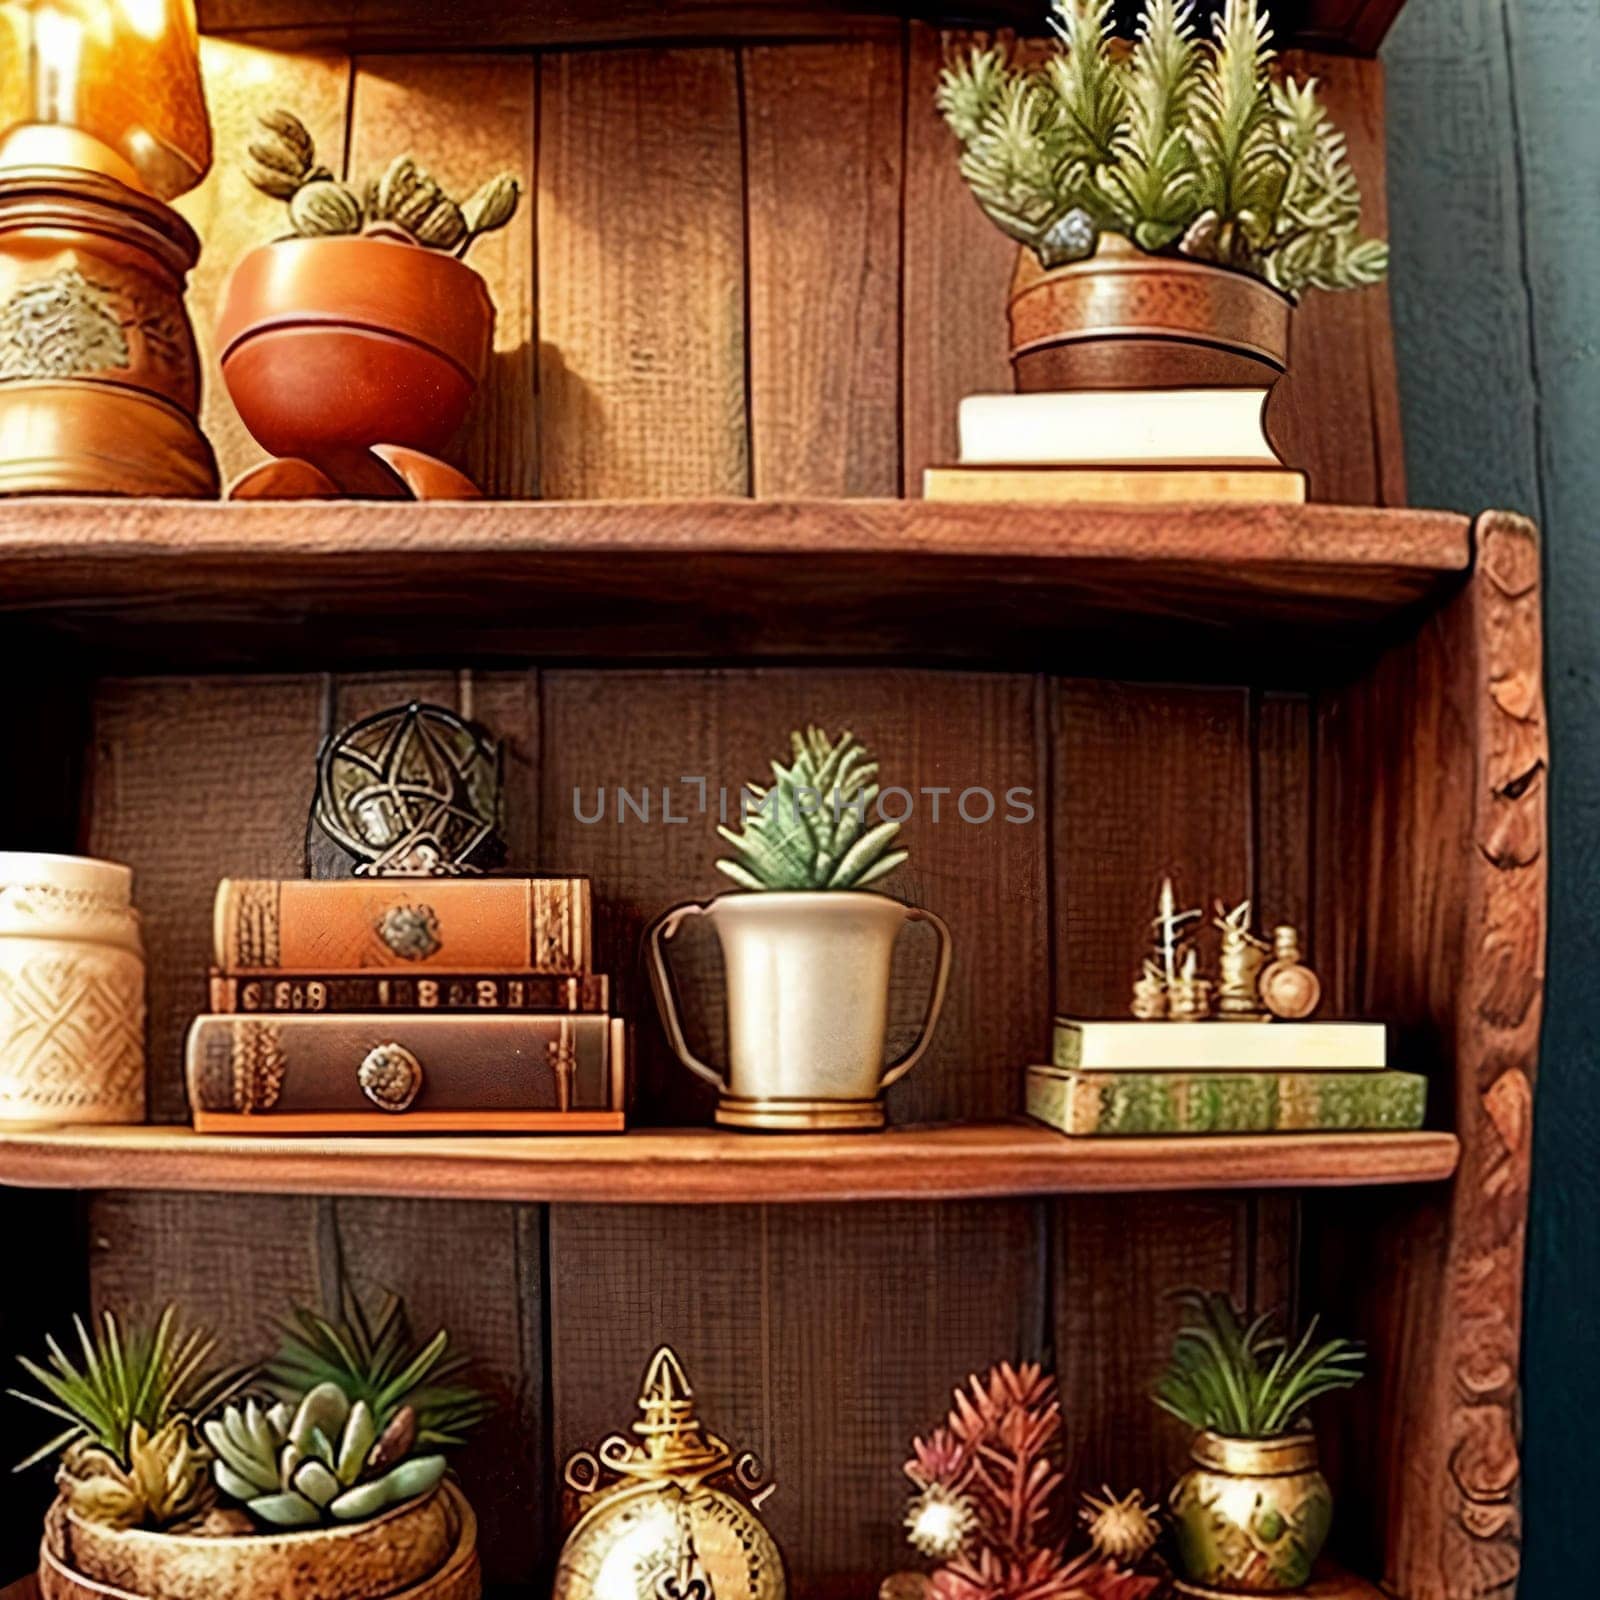 Intricate details of a rustic wooden bookshelf. by GoodOlga